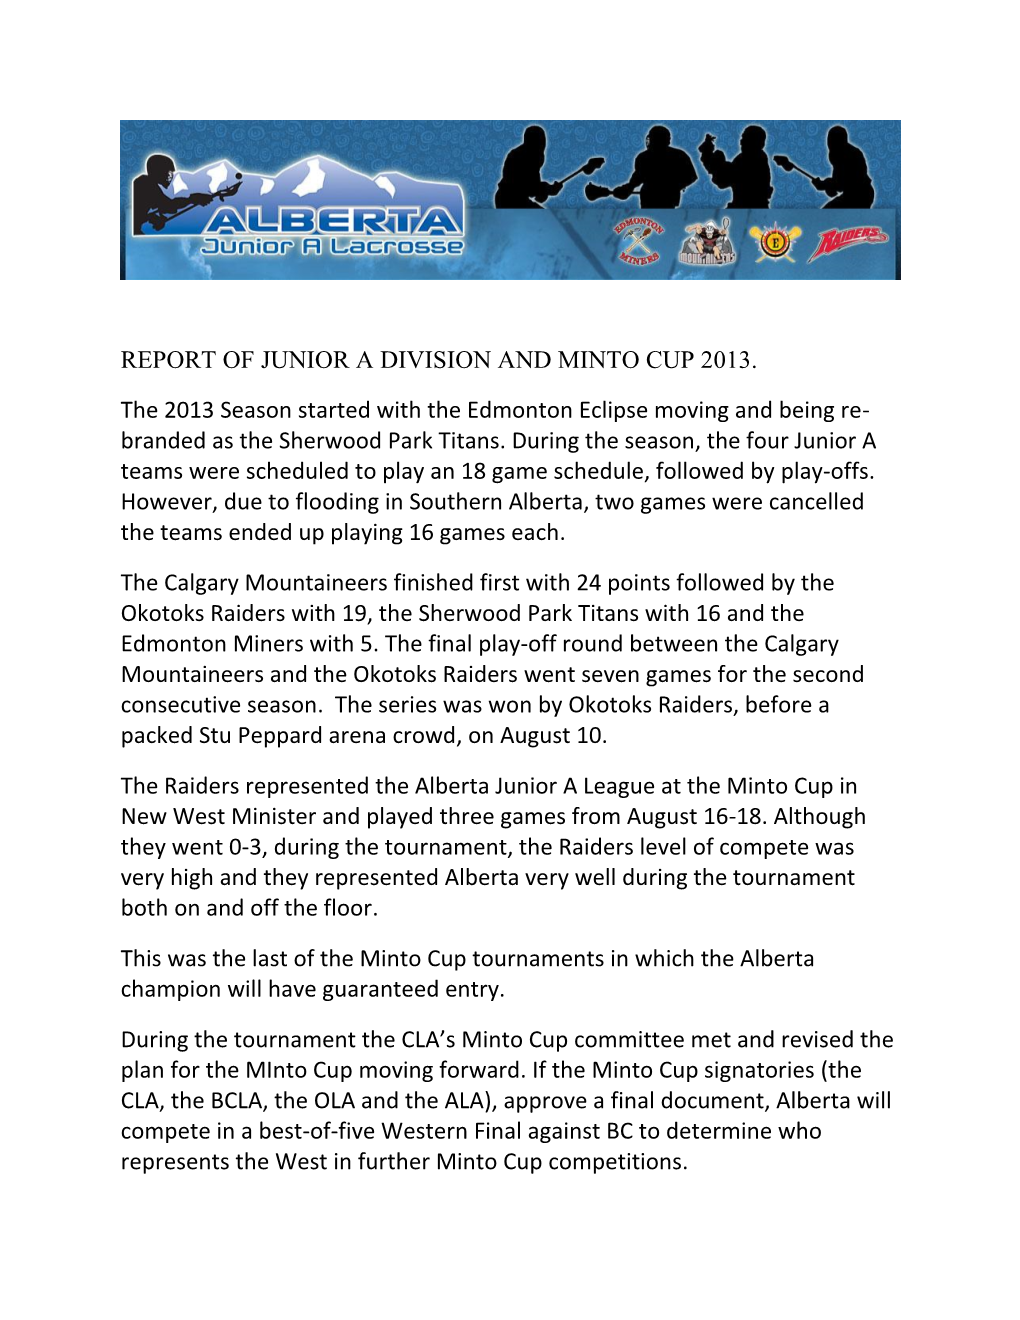 Report of Junior a Division and Minto Cup 2013